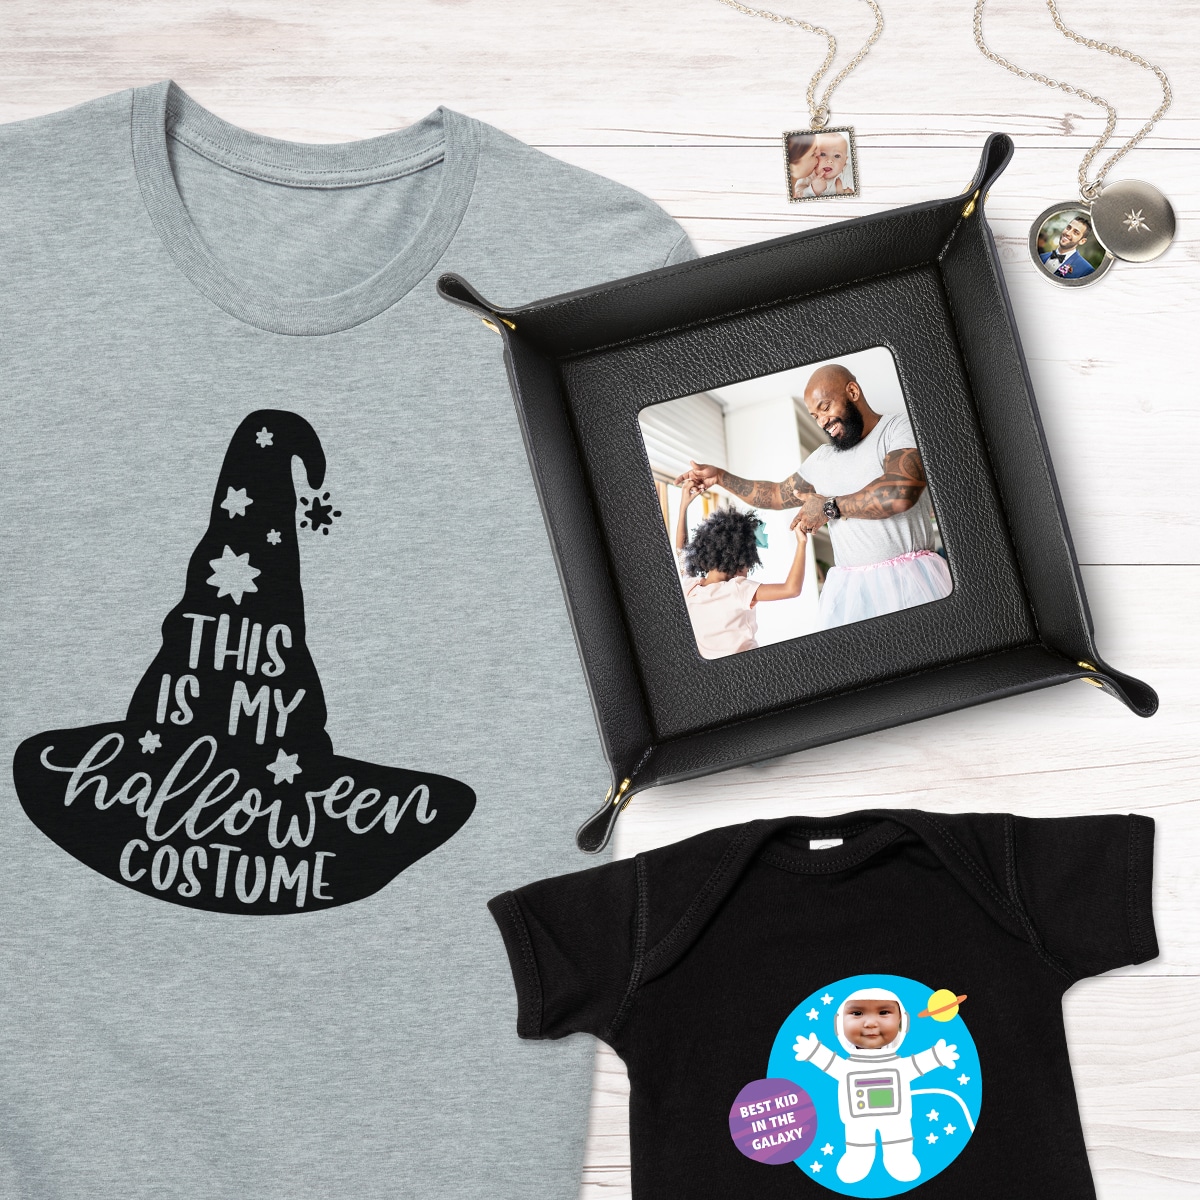 An adult t-shirt with a halloween design, a toddler t-shirt featuring an astronaut design, a valet tray featuring a photo of a dad and daughter dancing, and two photo necklaces are all laying on a tabletop.